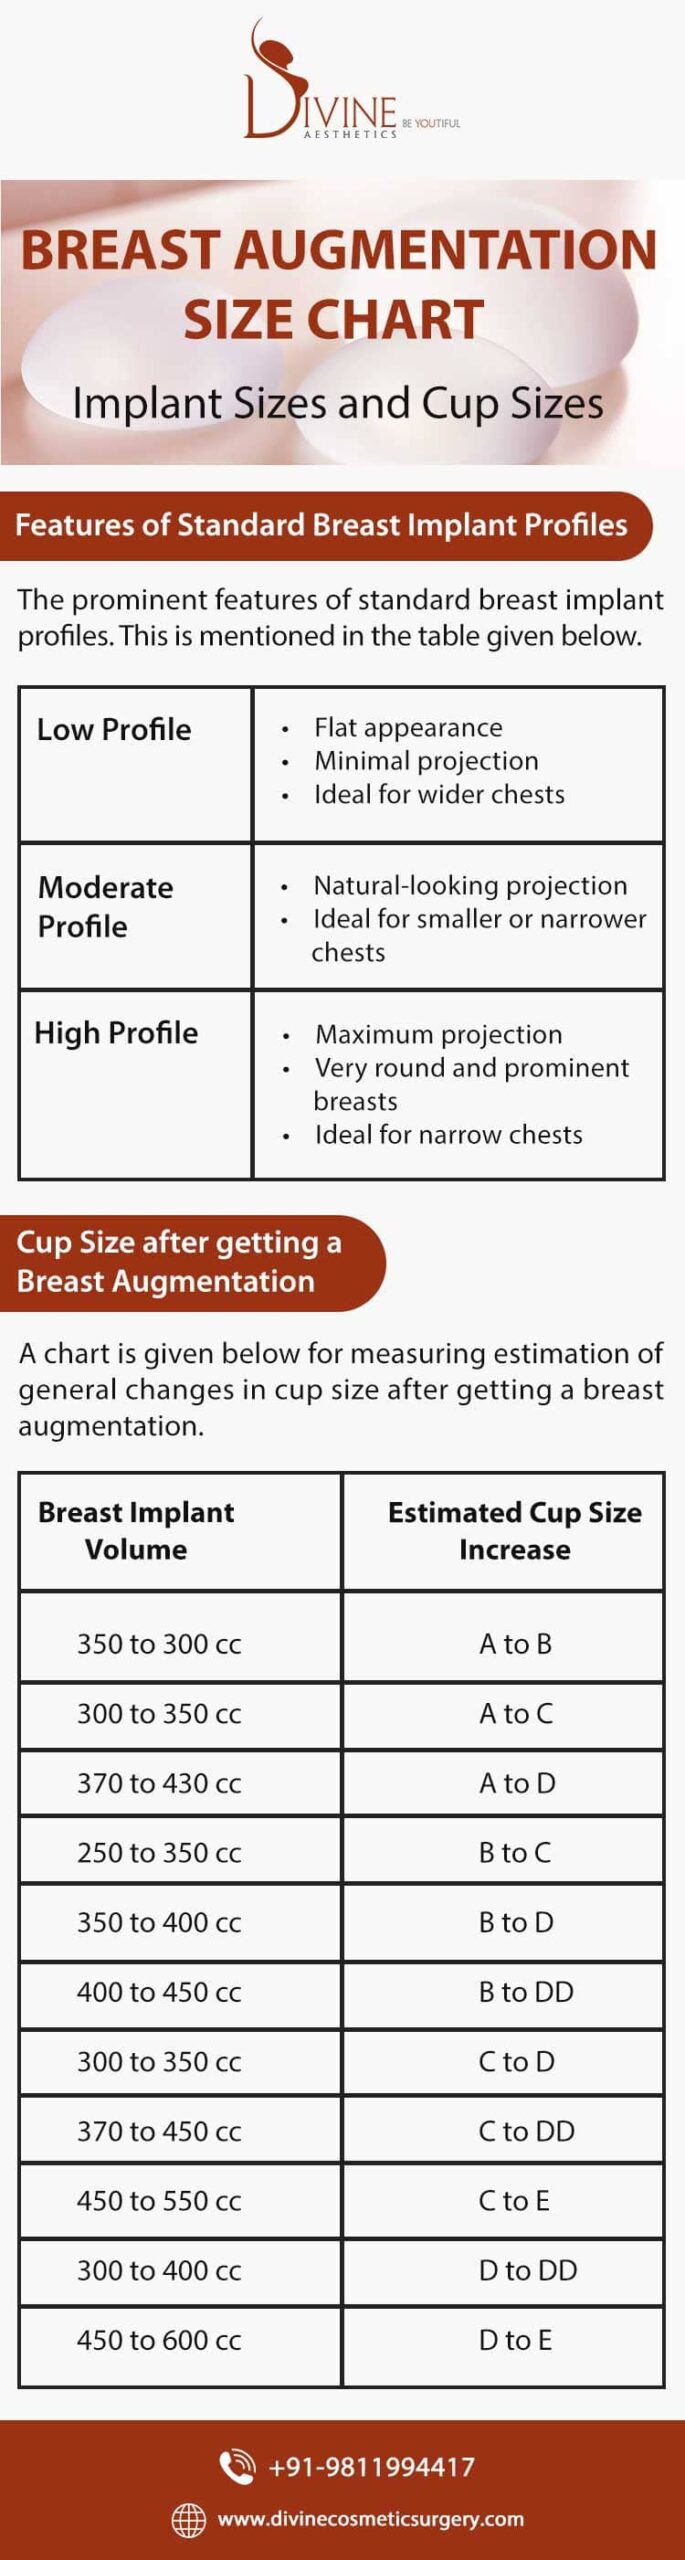 https://www.divinecosmeticsurgery.com/wp-content/uploads/2023/01/Breast-Augmentation-Size-Chart-%E2%80%93-List-of-Ideal-Implant-Sizes-and-Cup-Sizes-scaled.jpg